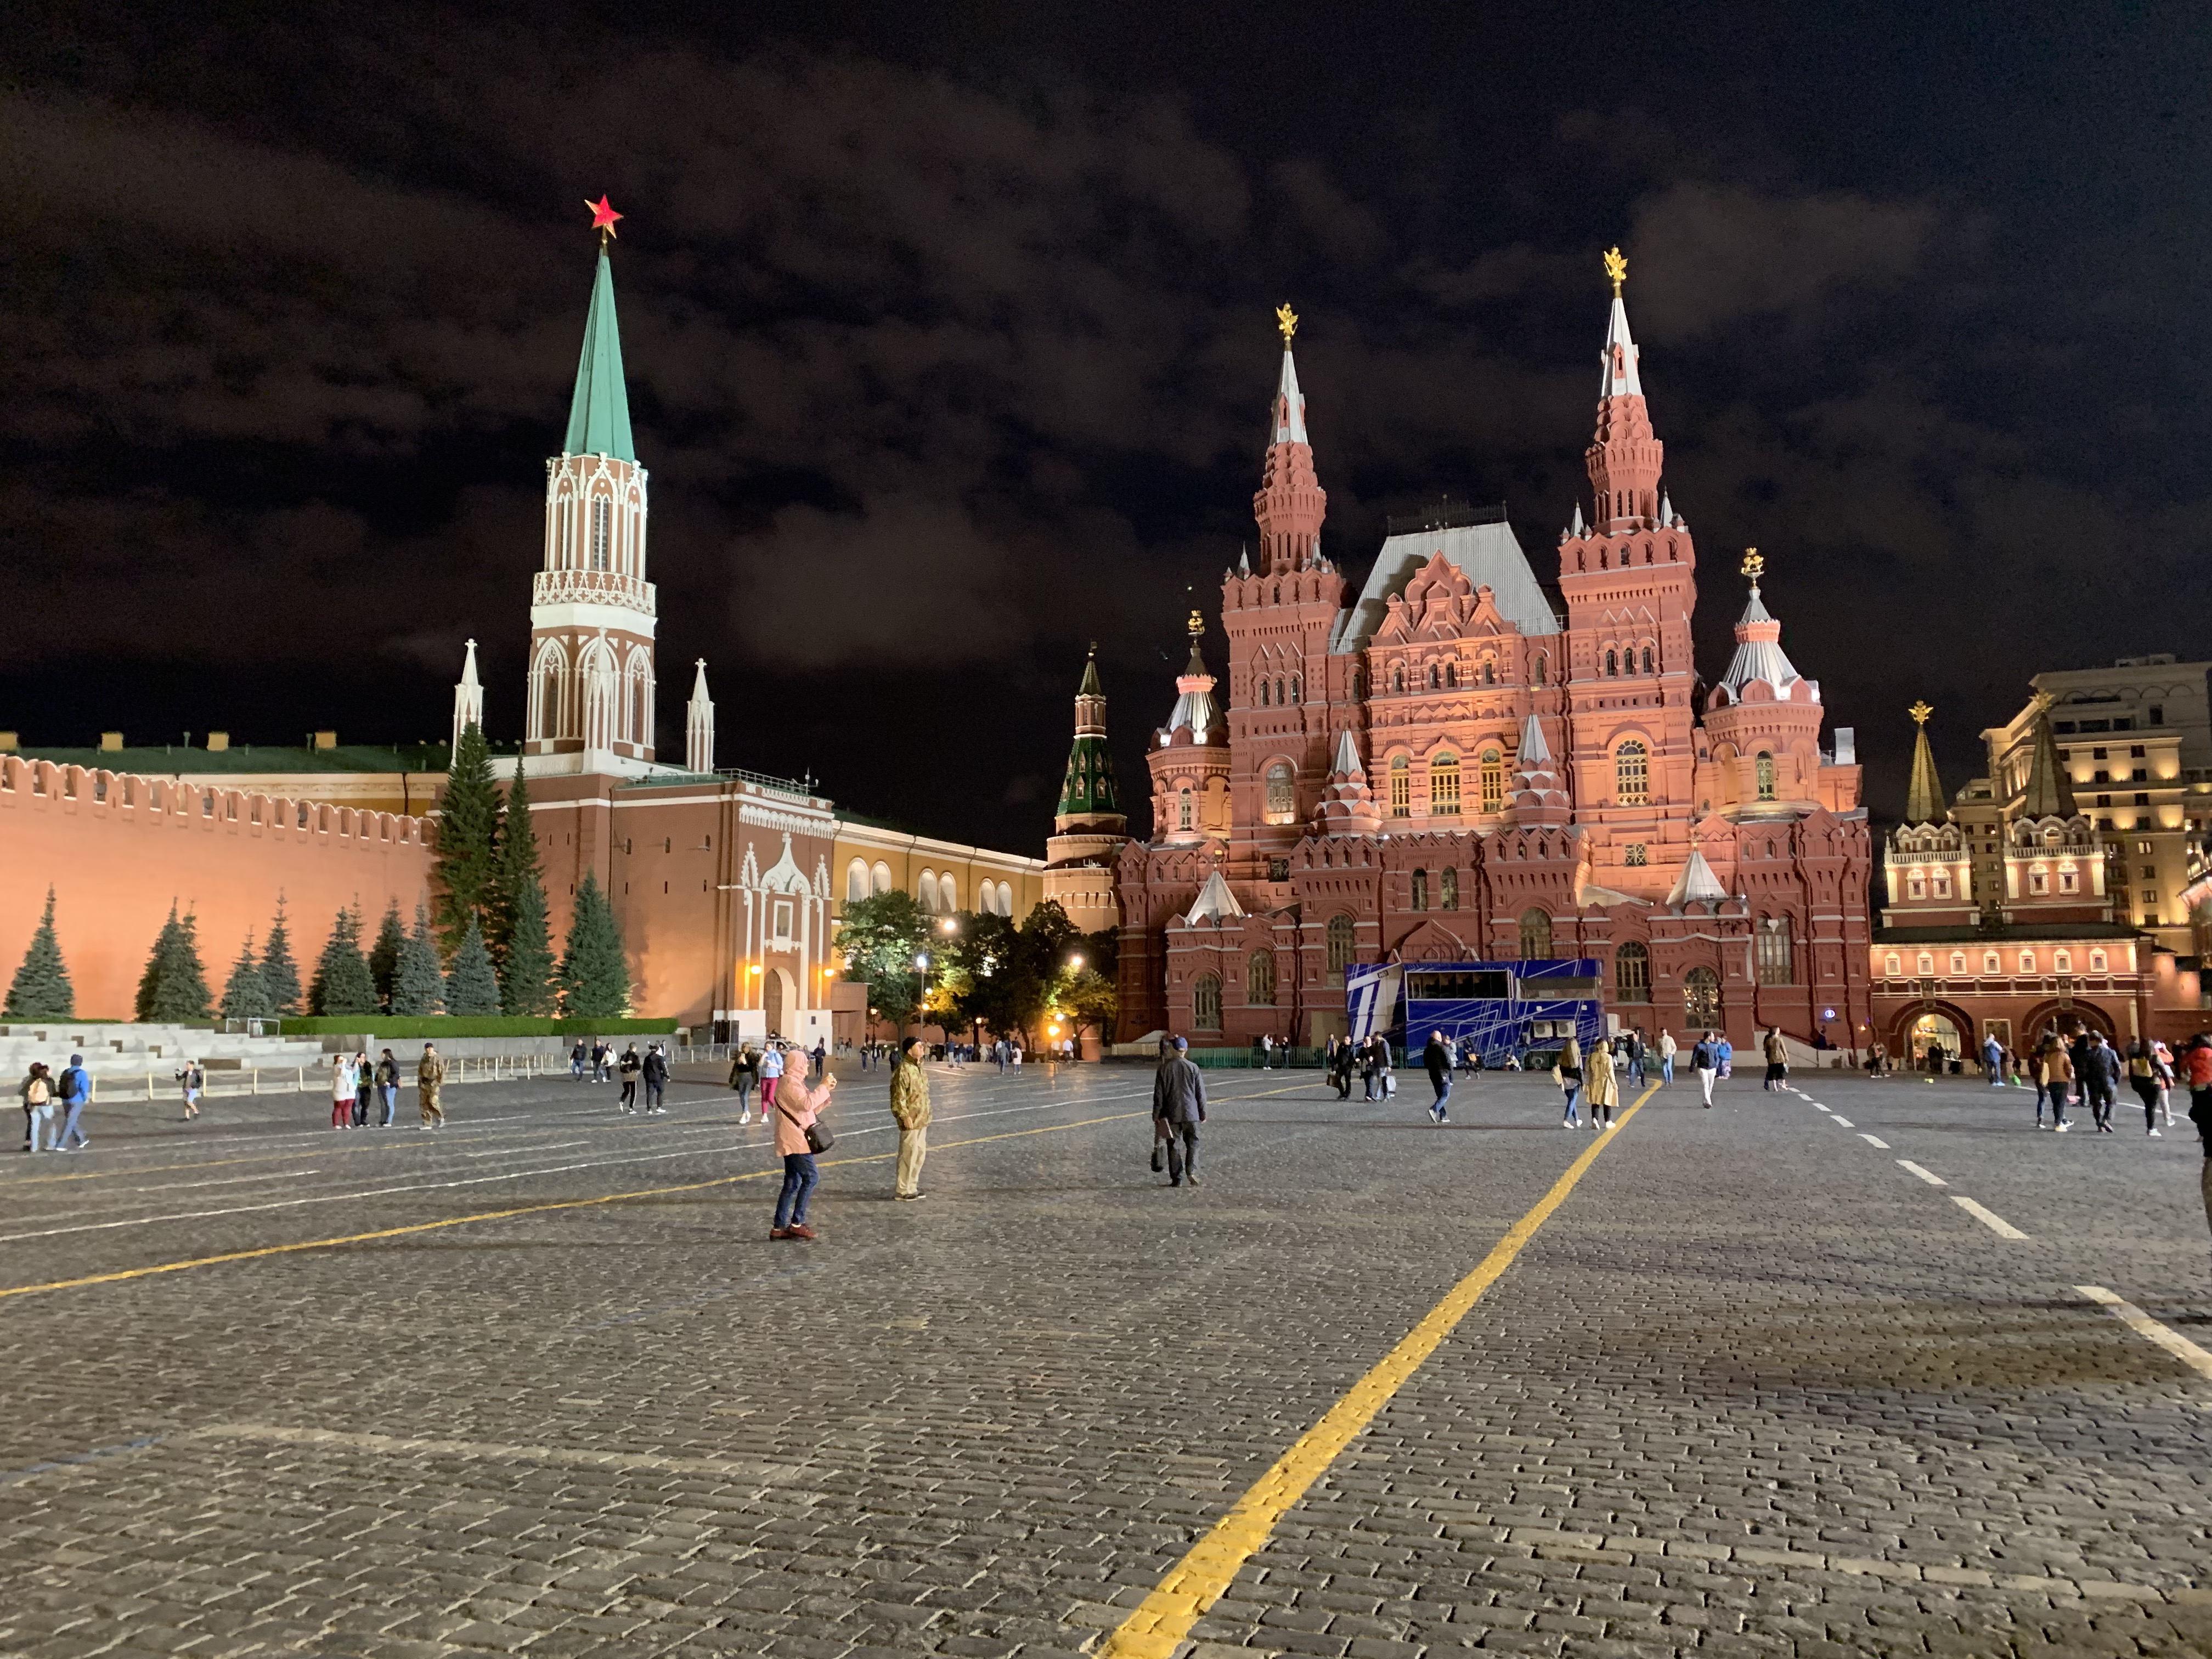 Red Square, the Kremlin and surrounding sites - Moscow, Russia